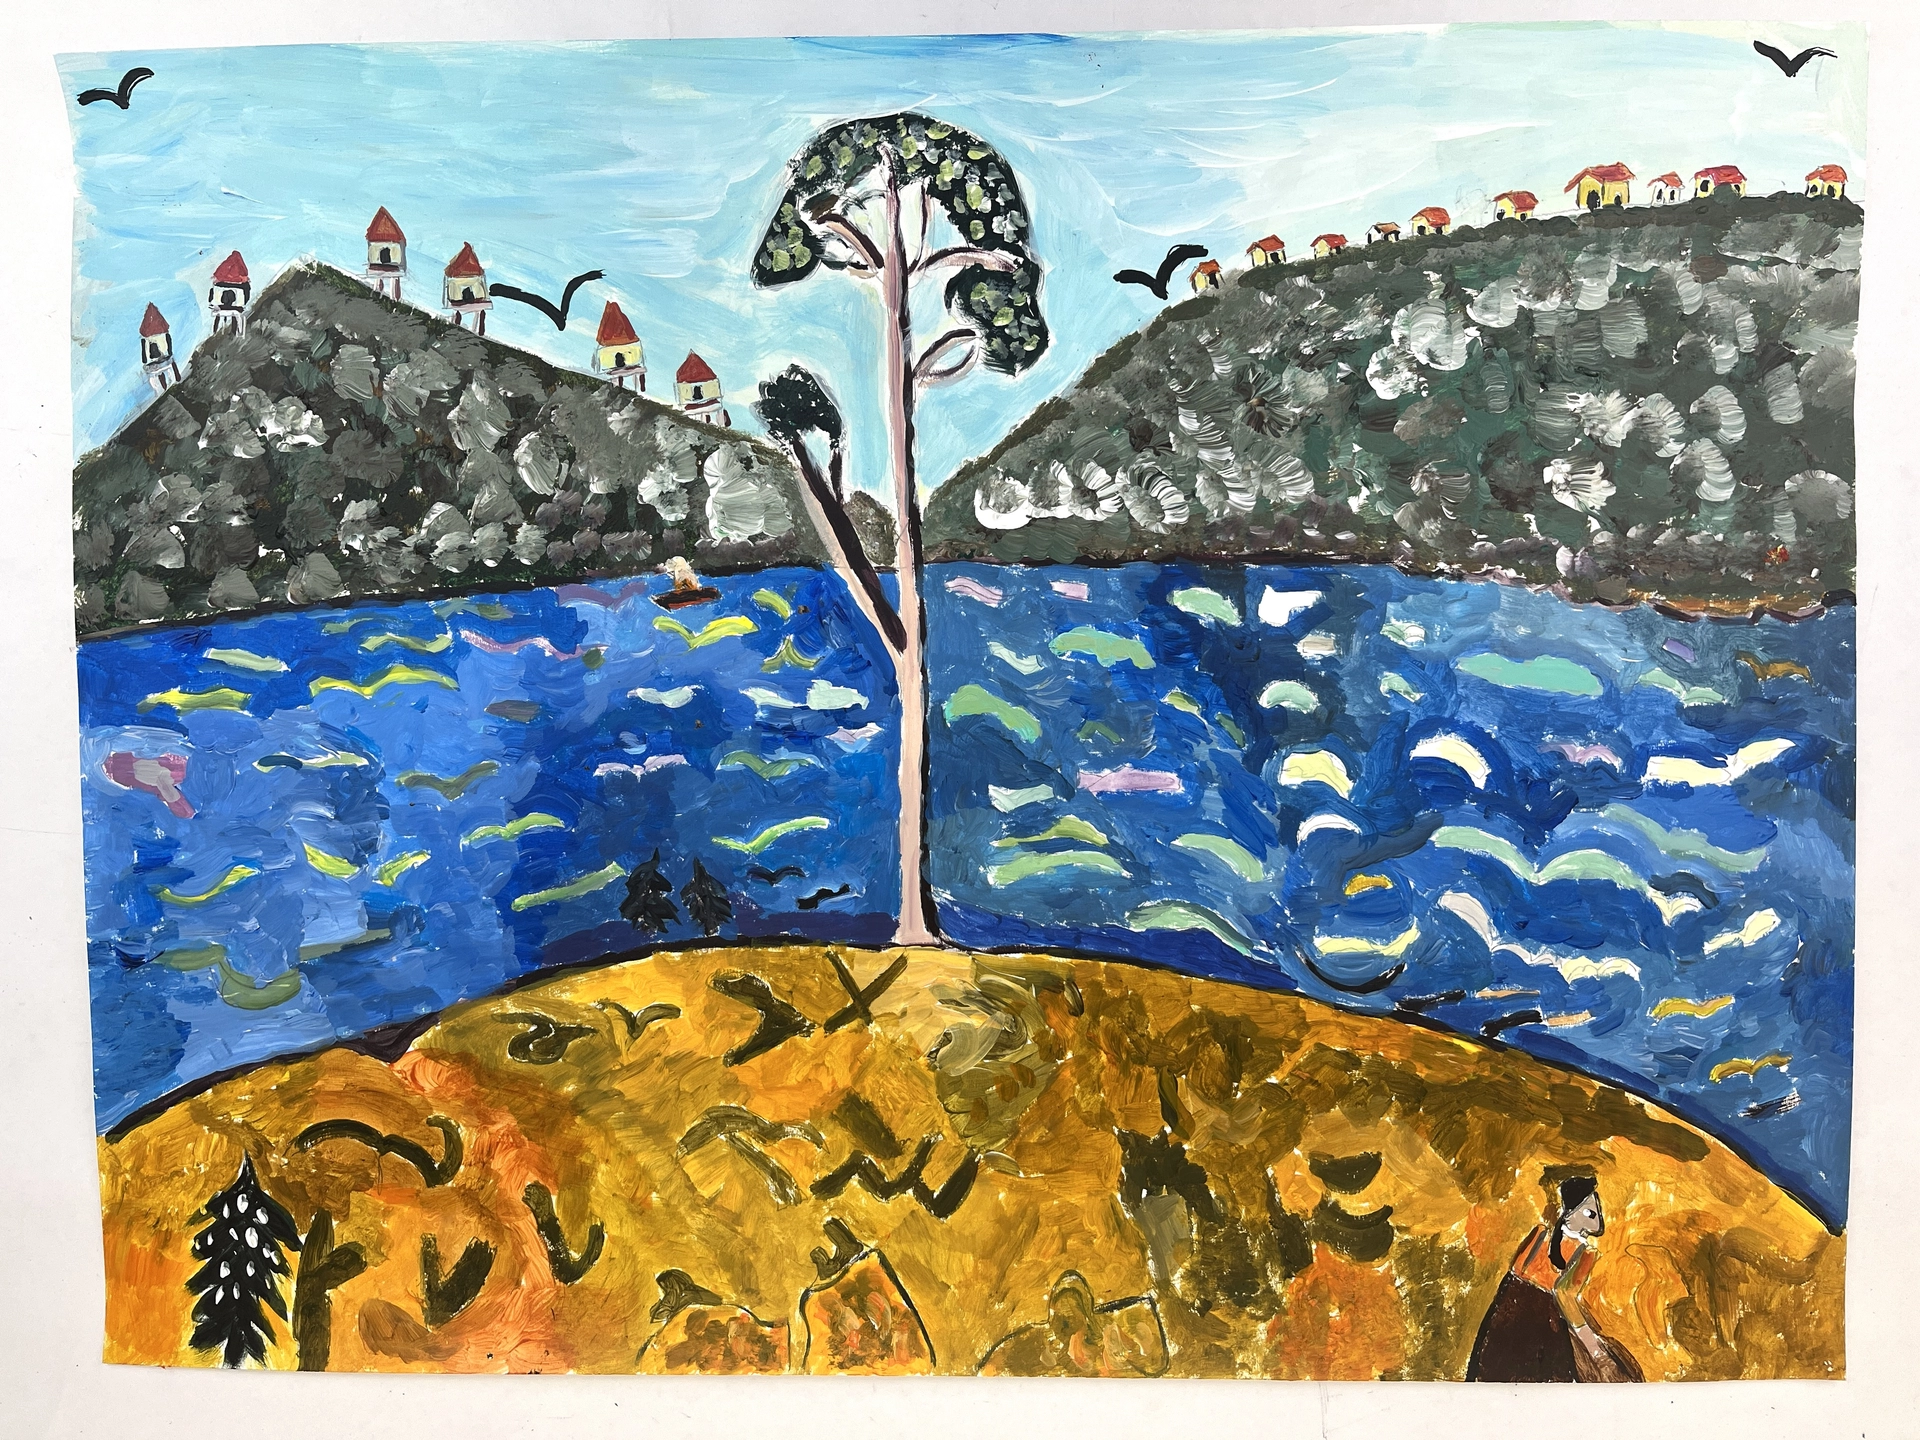 An acrylic painting of an idyllic scene of birds that hover in a soft blue sky, houses dot the tops of paint-daubed mountains, a deep blue body of water ripples with multicolored bands, while in the foreground, a woman traverses an earthy yellow mound and a tree stands tall through the center of scene, tying it all together.